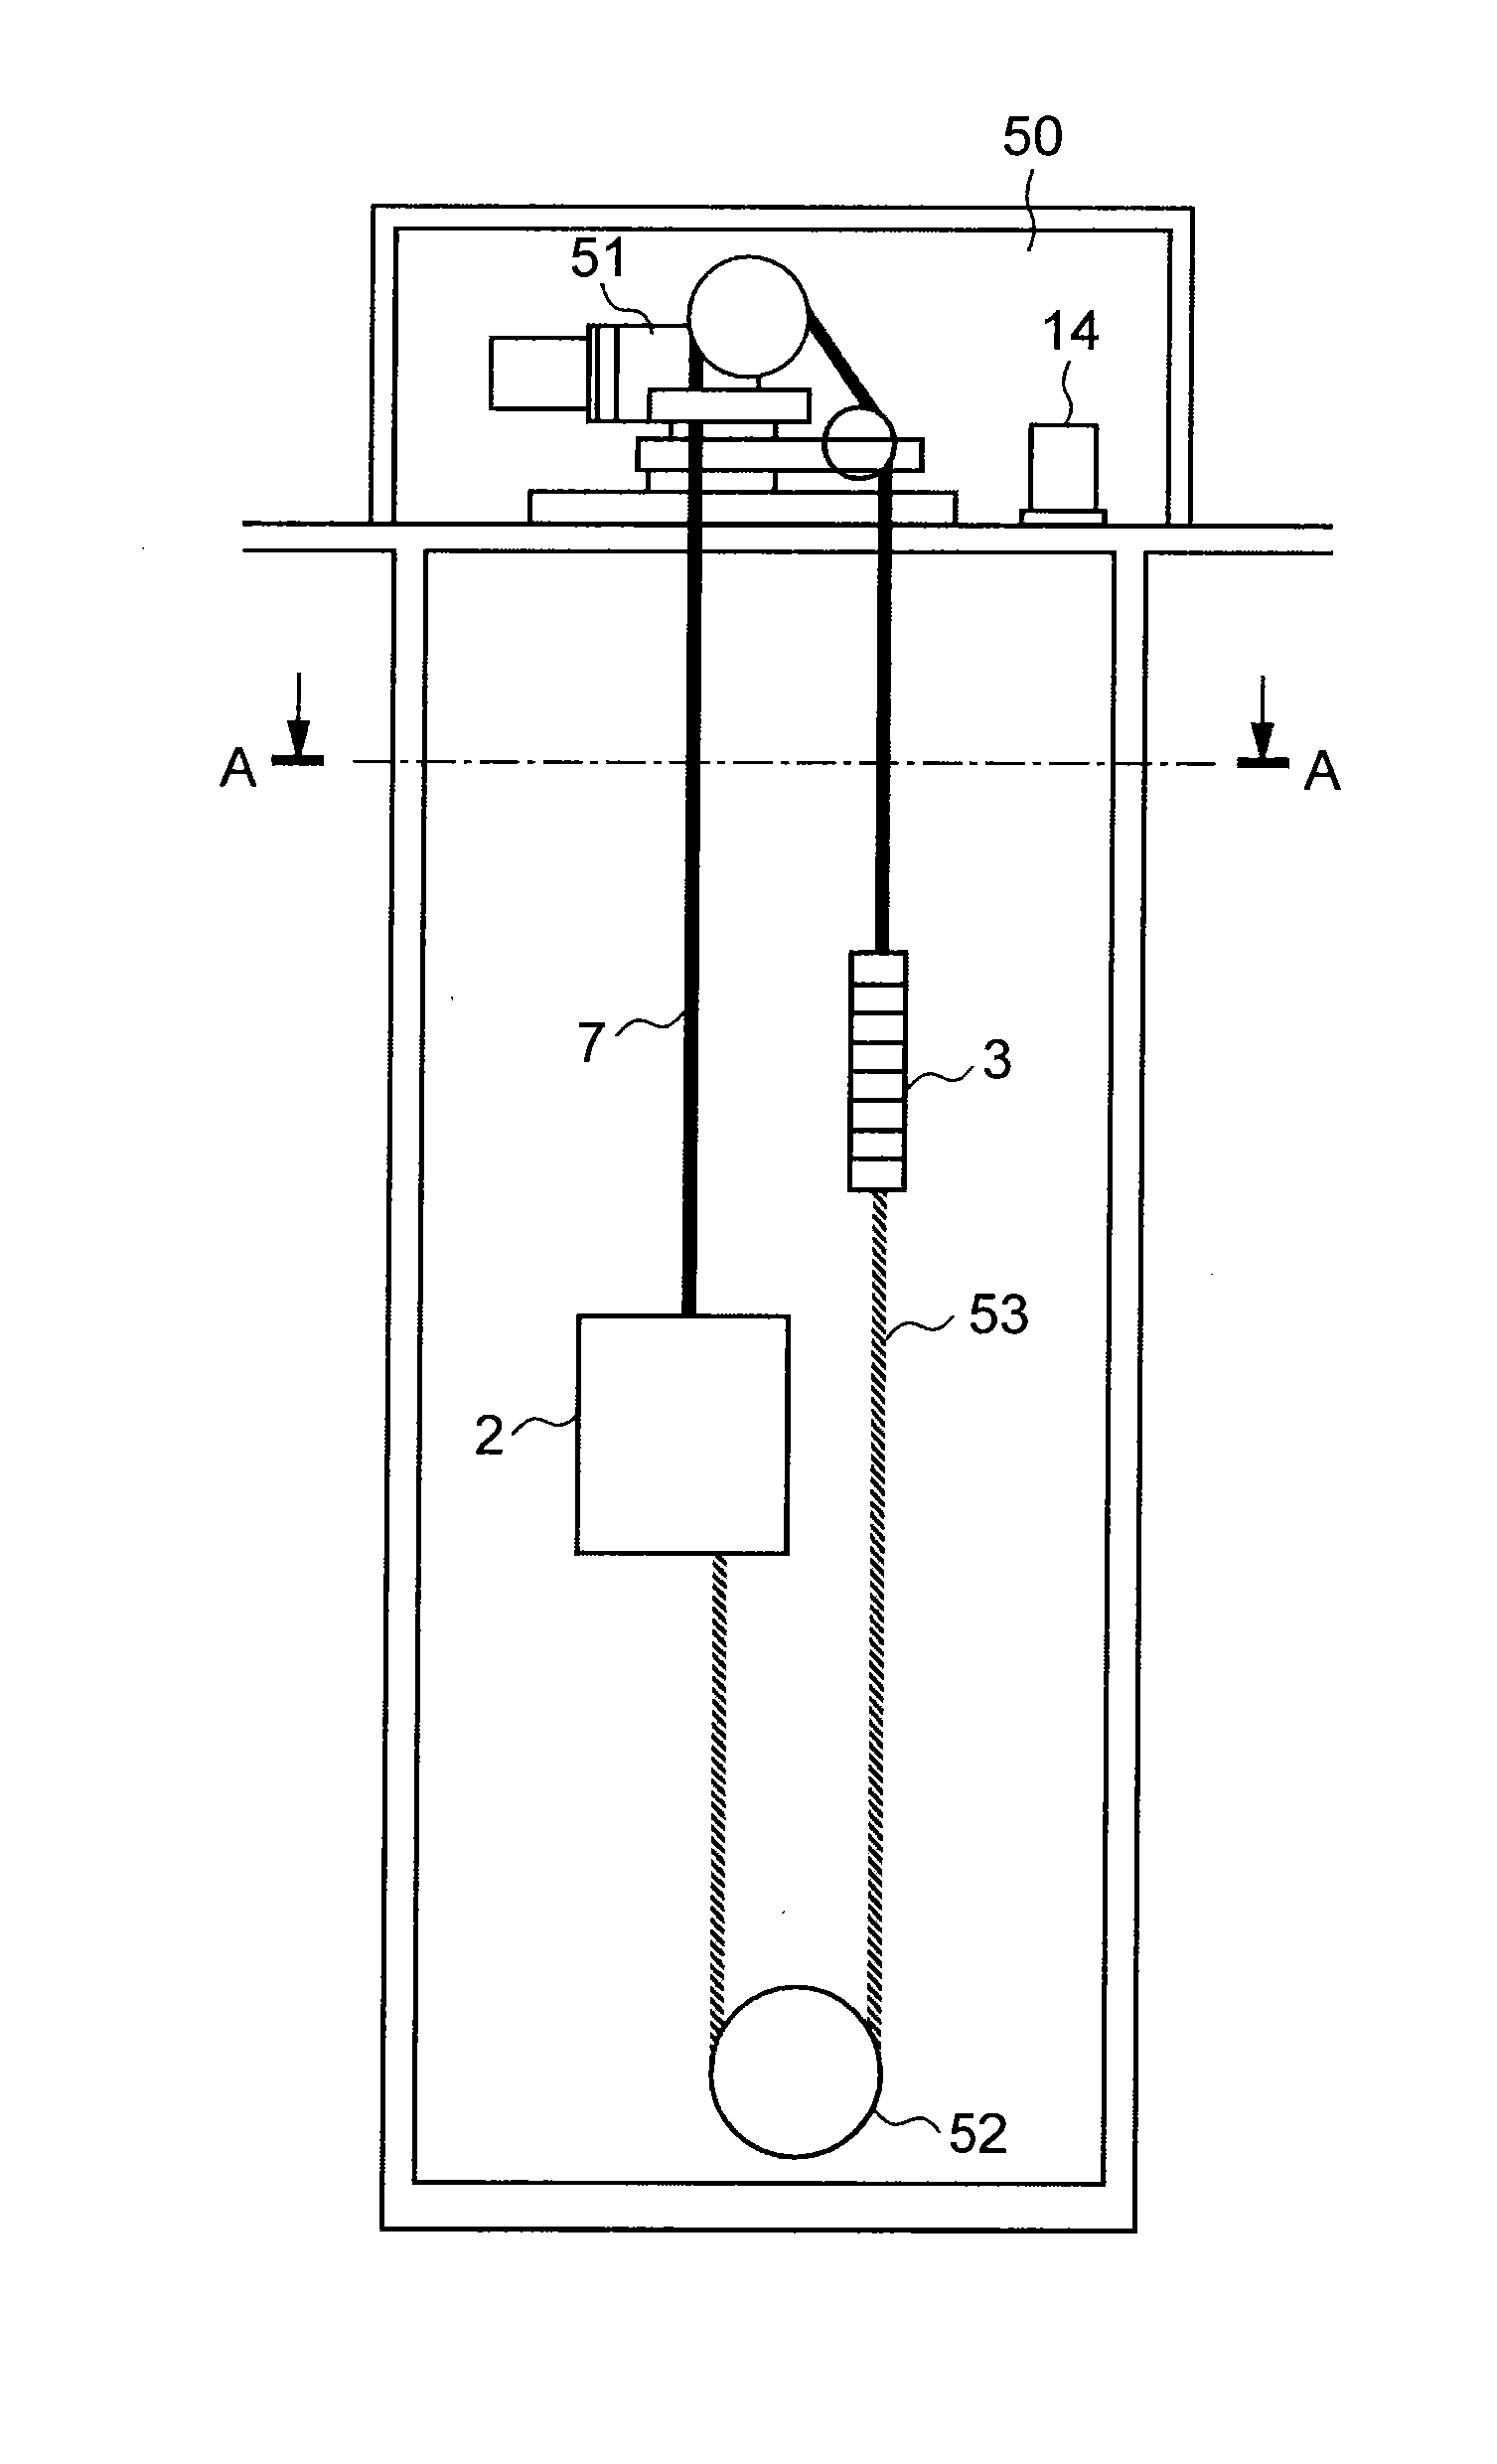 Elevator rope sway detection device